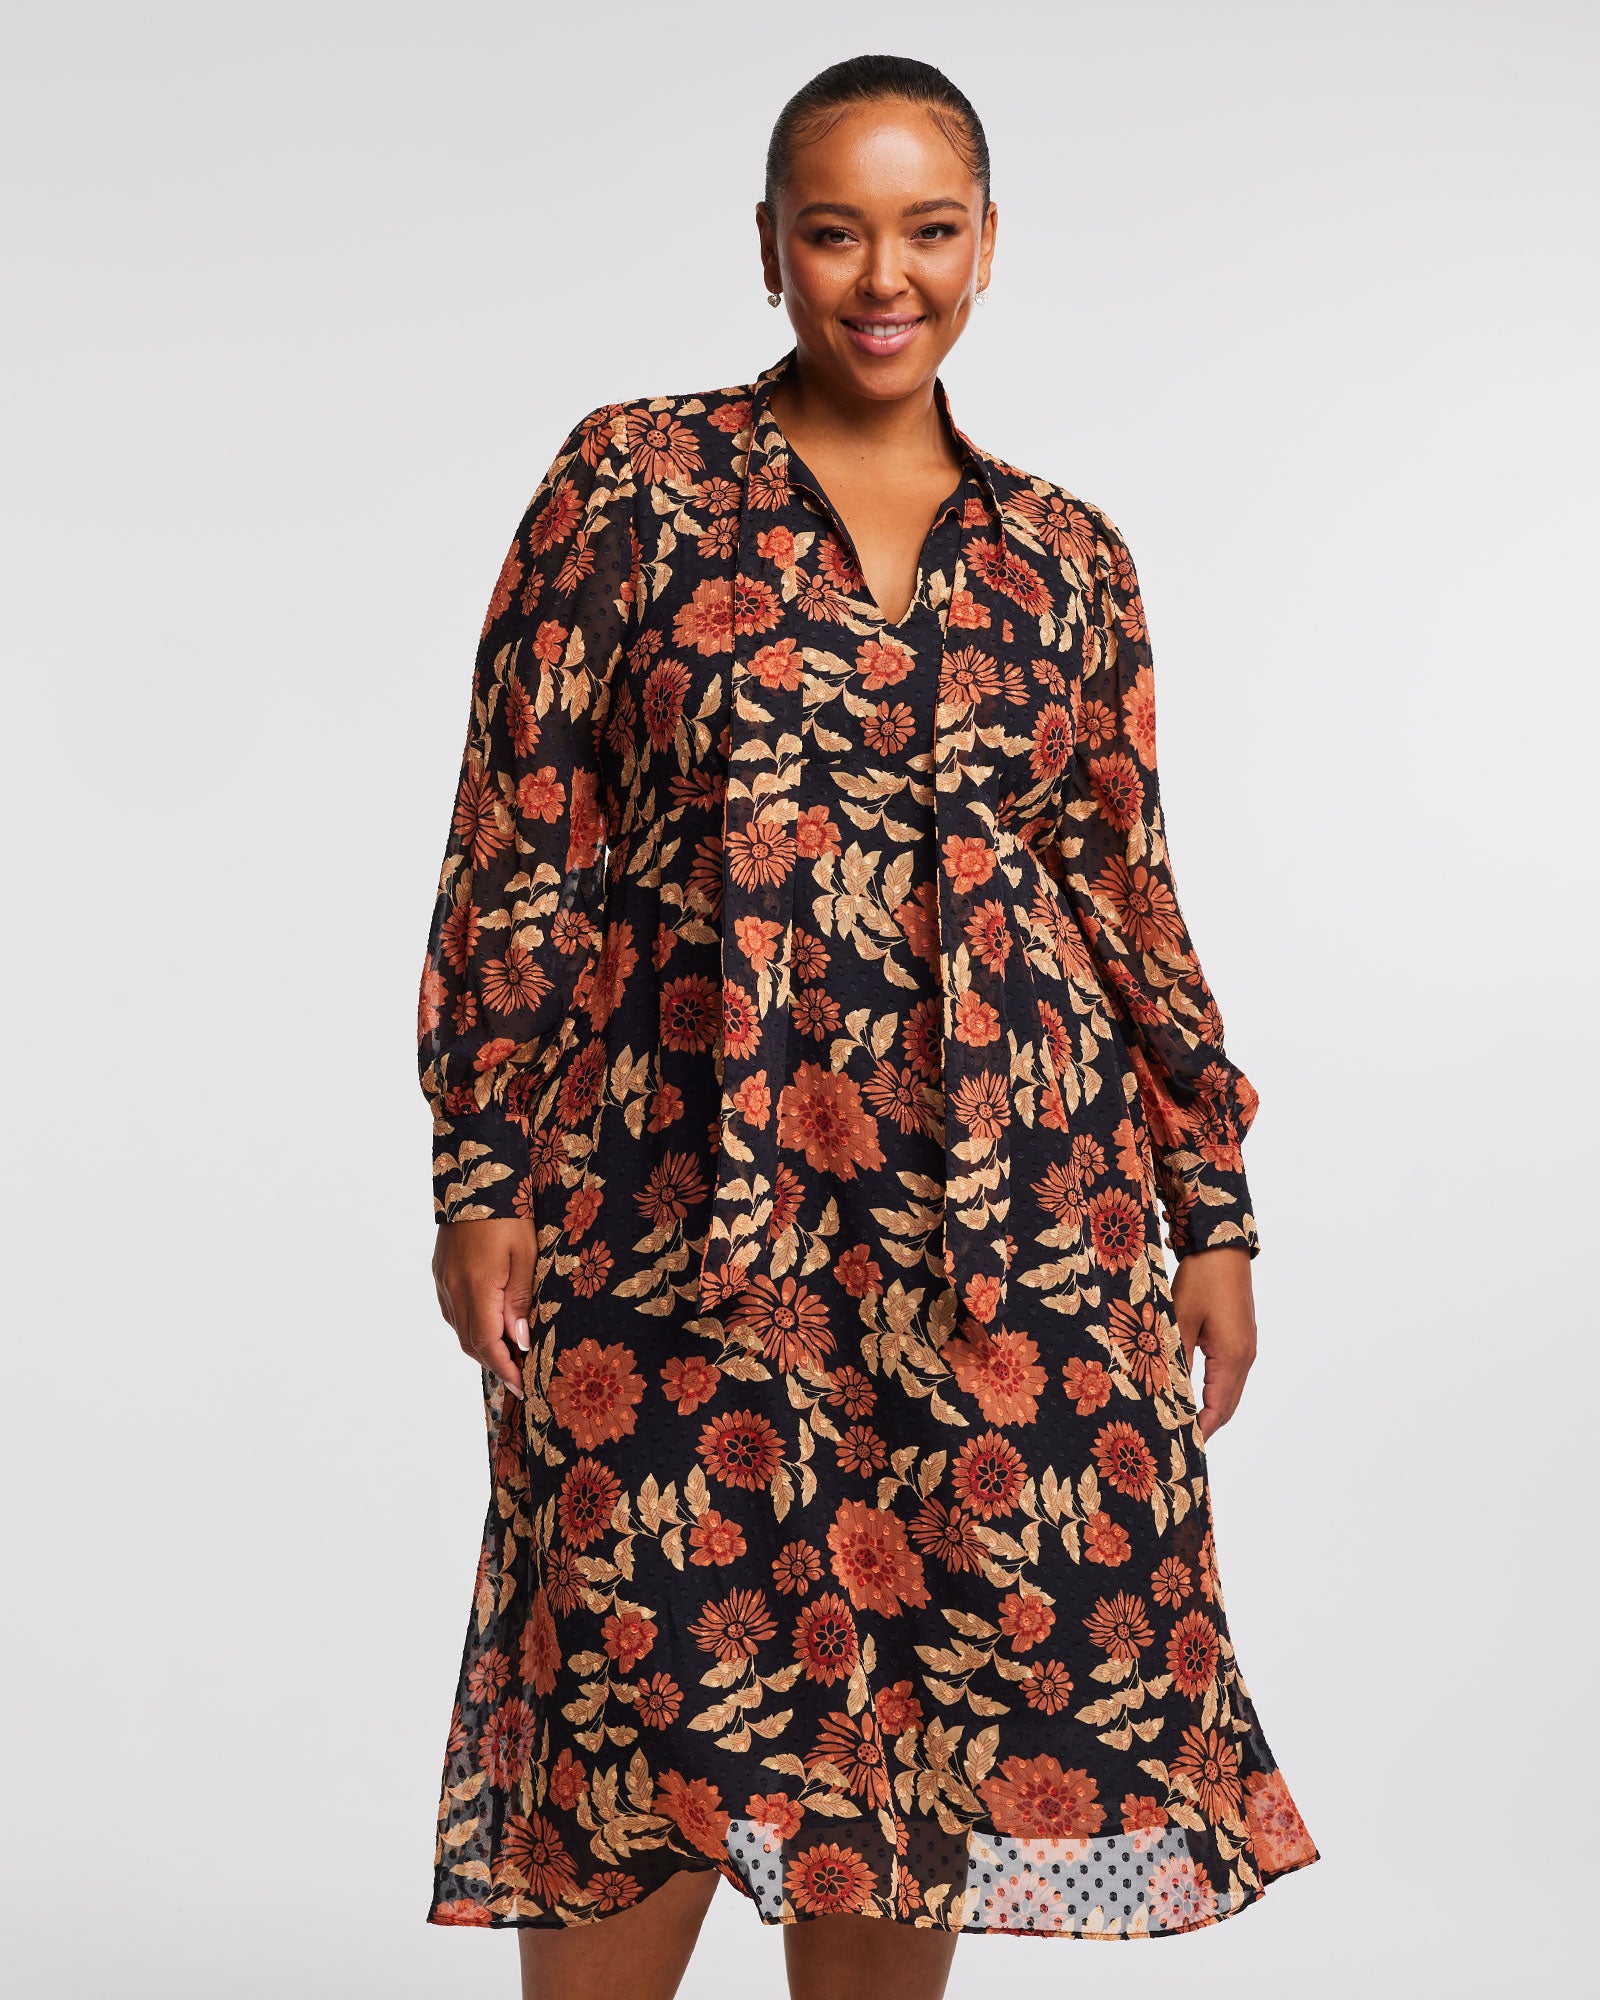 A plus size woman wearing an Autumnal Floral Midi Dress with Neck-Tie.